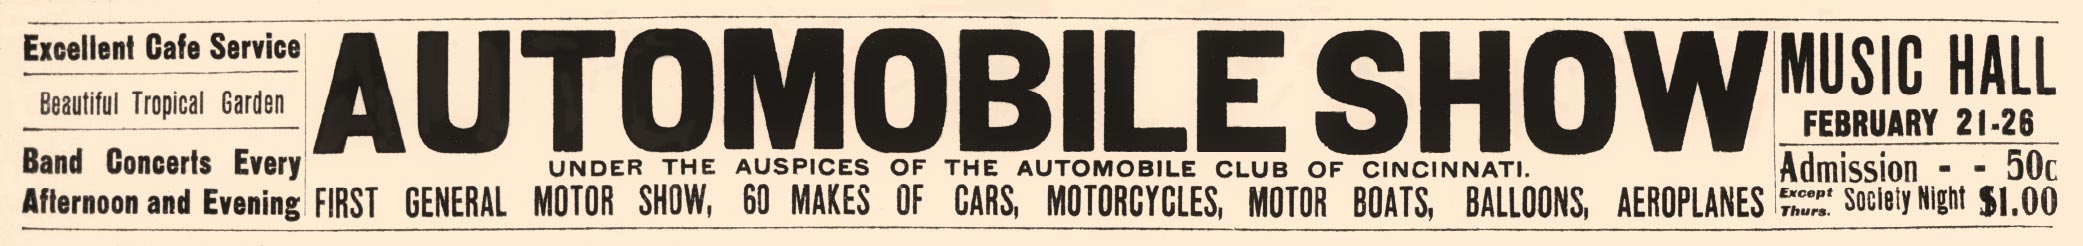 Ad for the first annual Automobile Show under the Auspices of the Automobile Club of Cincinnati. This ad appeared in the "Cincinnati Commercial Tribune" on page 18.